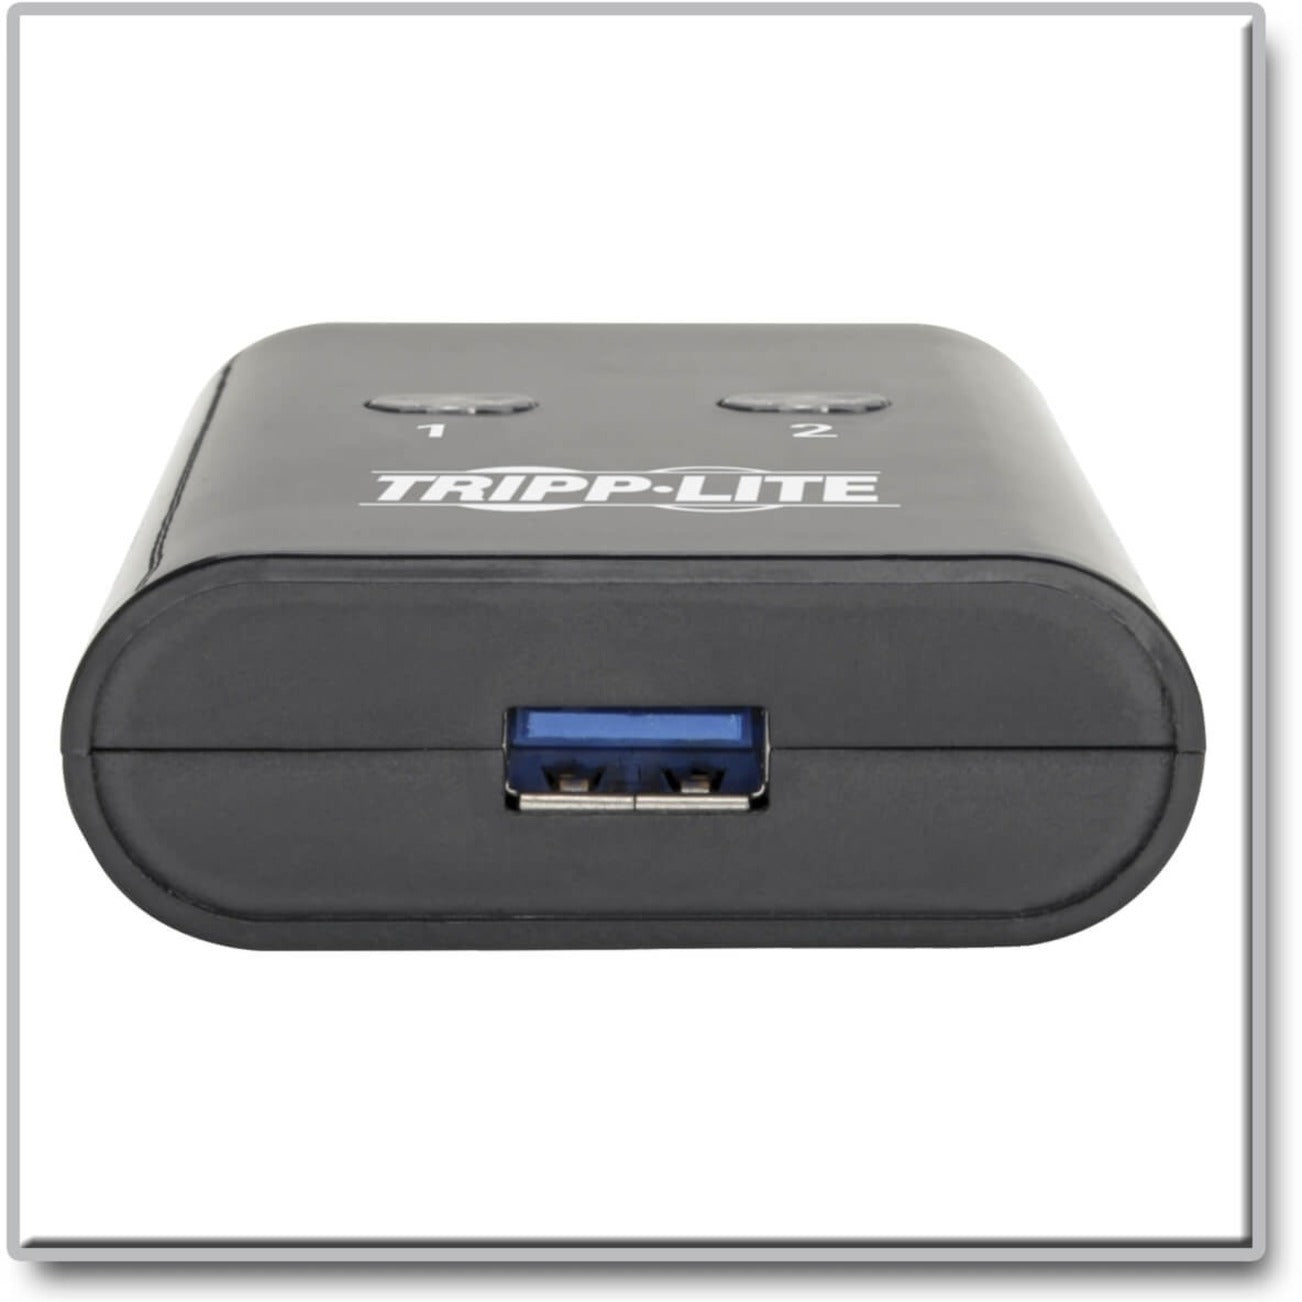 Tripp Lite U359-002 2-Port USB 3.0 Peripheral Sharing Switch - SuperSpeed, Convenient USB Switch for Easy Peripheral Sharing